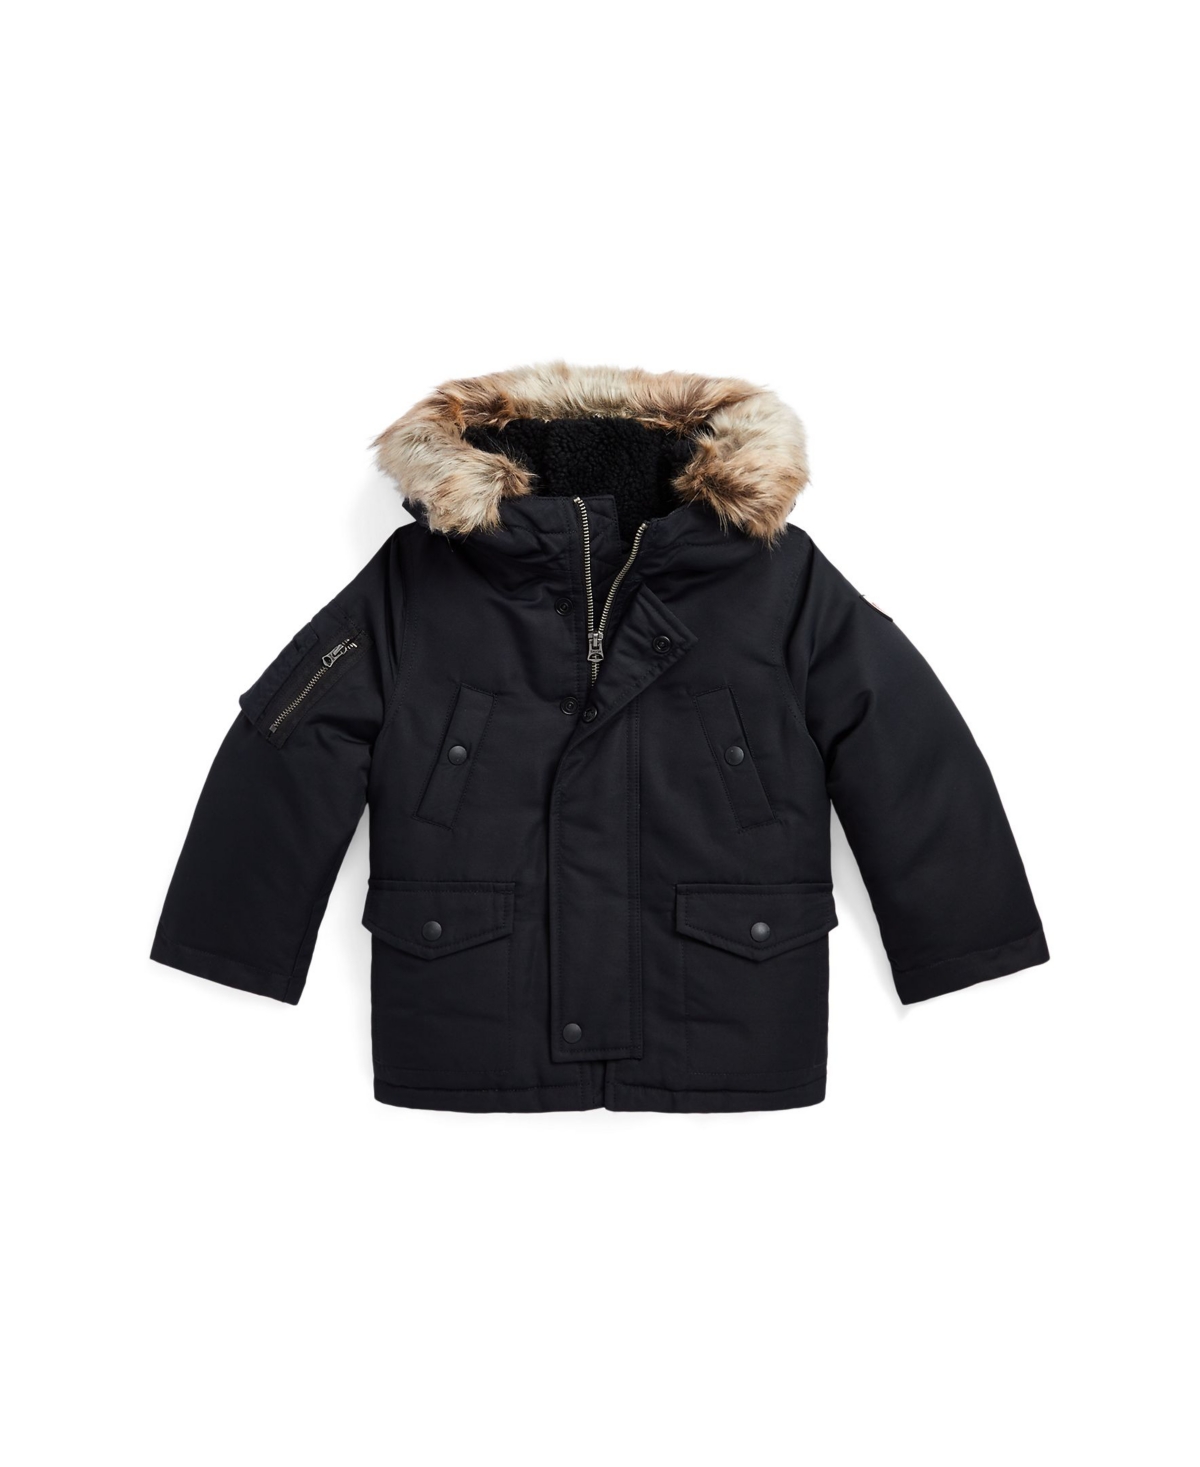 POLO RALPH LAUREN LITTLE AND TODDLER BOYS WATER-RESISTANT PARKA JACKET